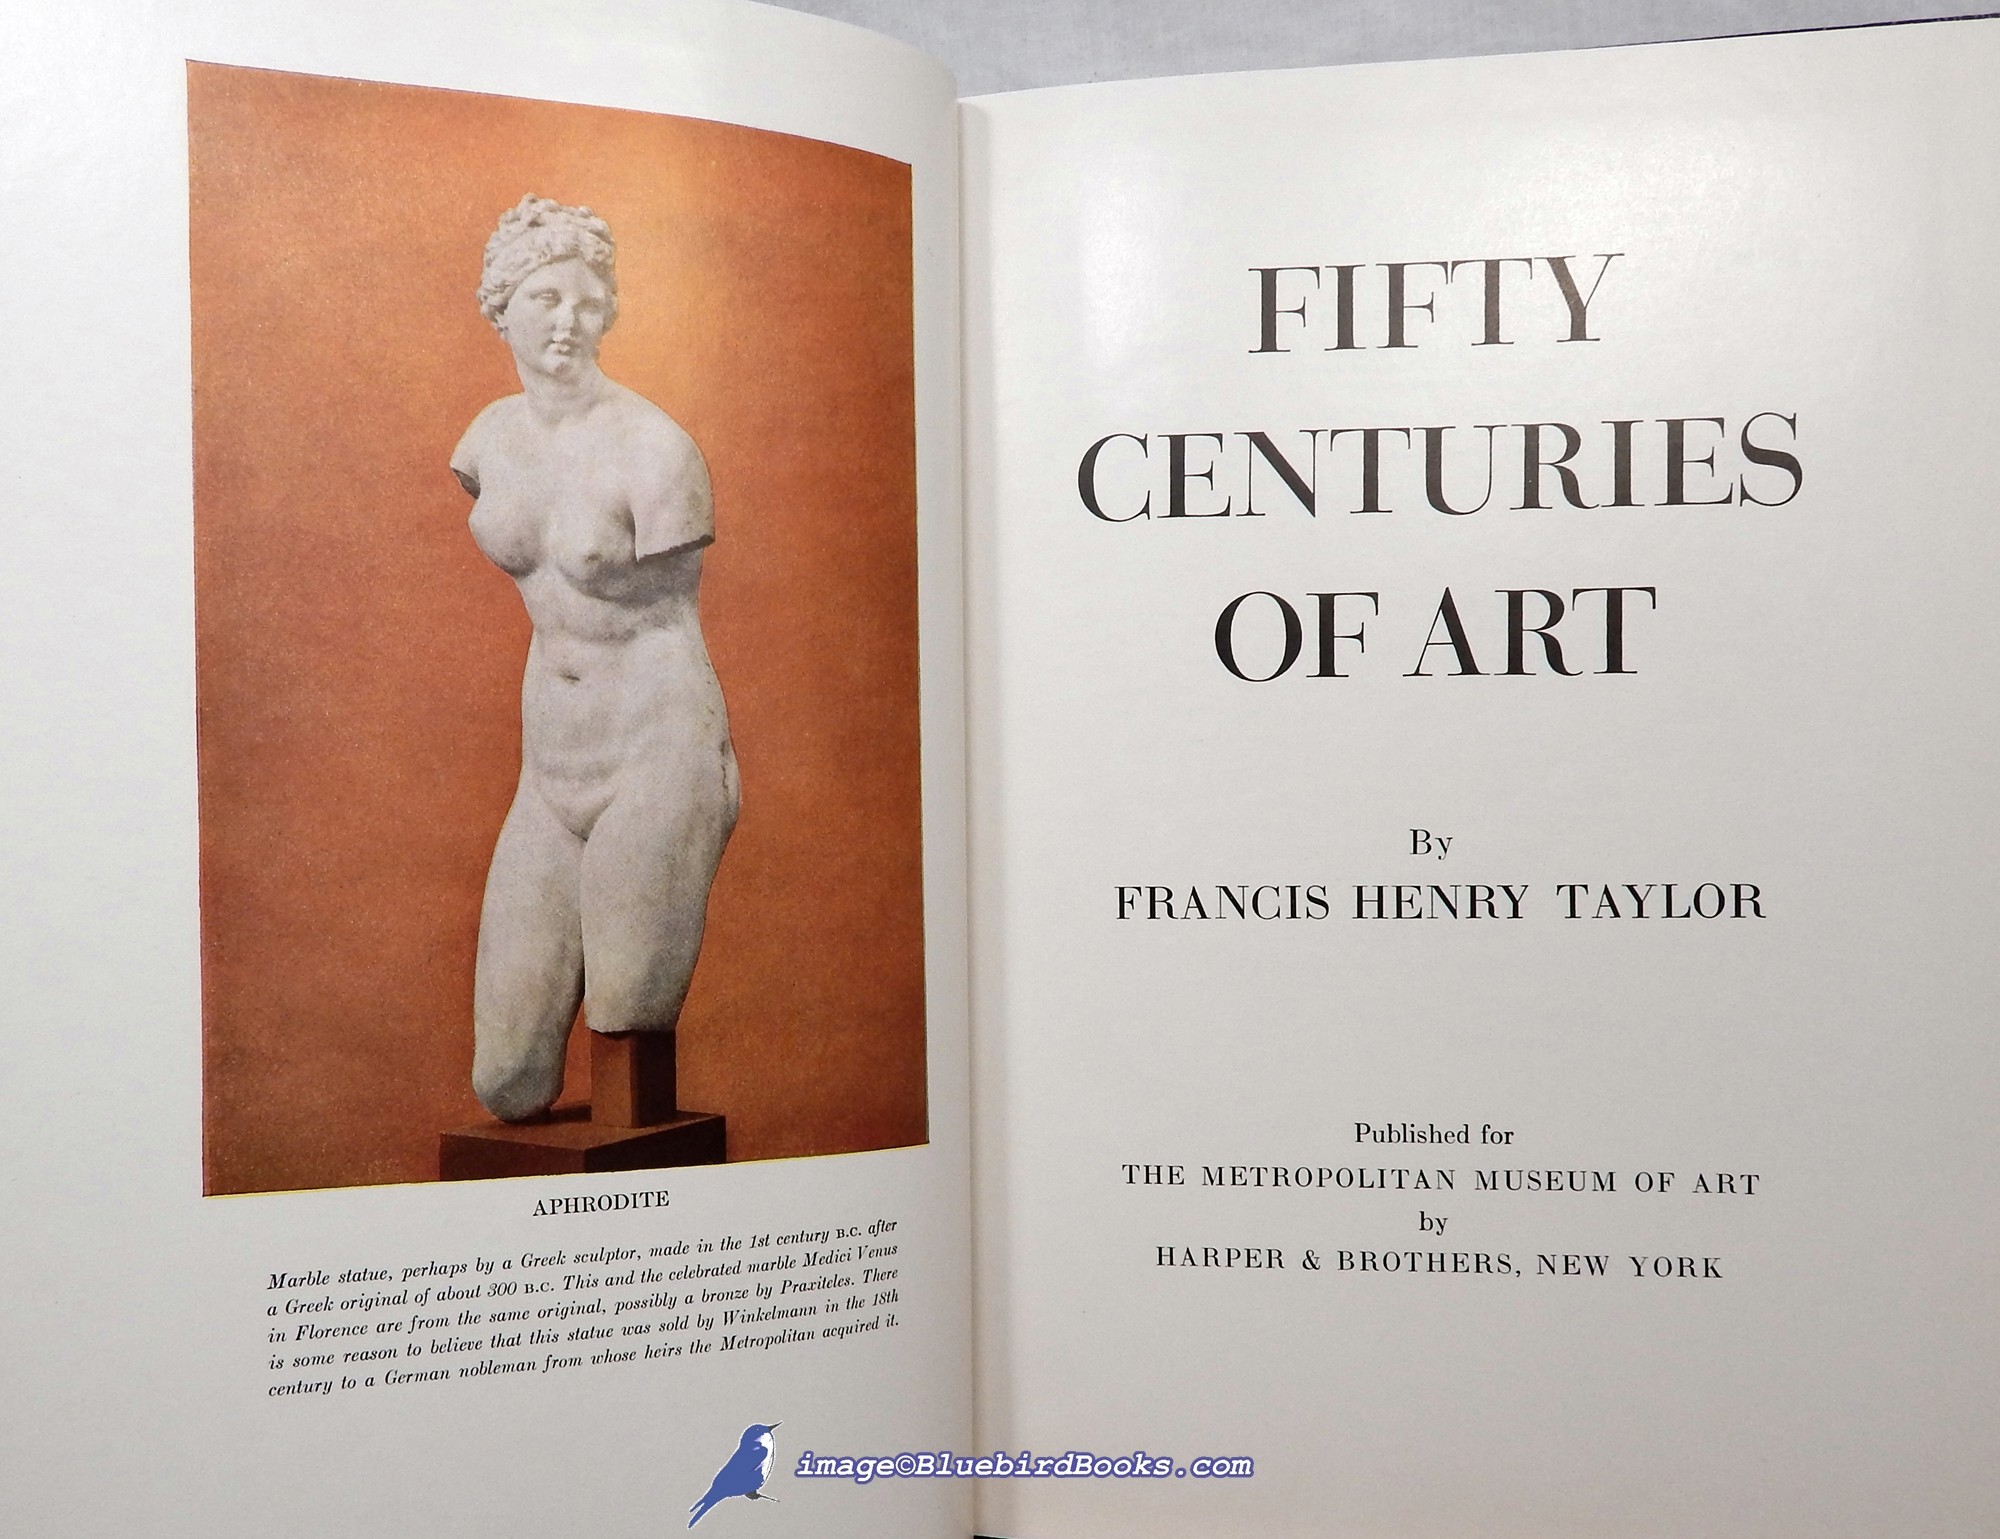 TAYLOR, FRANCIS HENRY - Fifty Centuries of Art